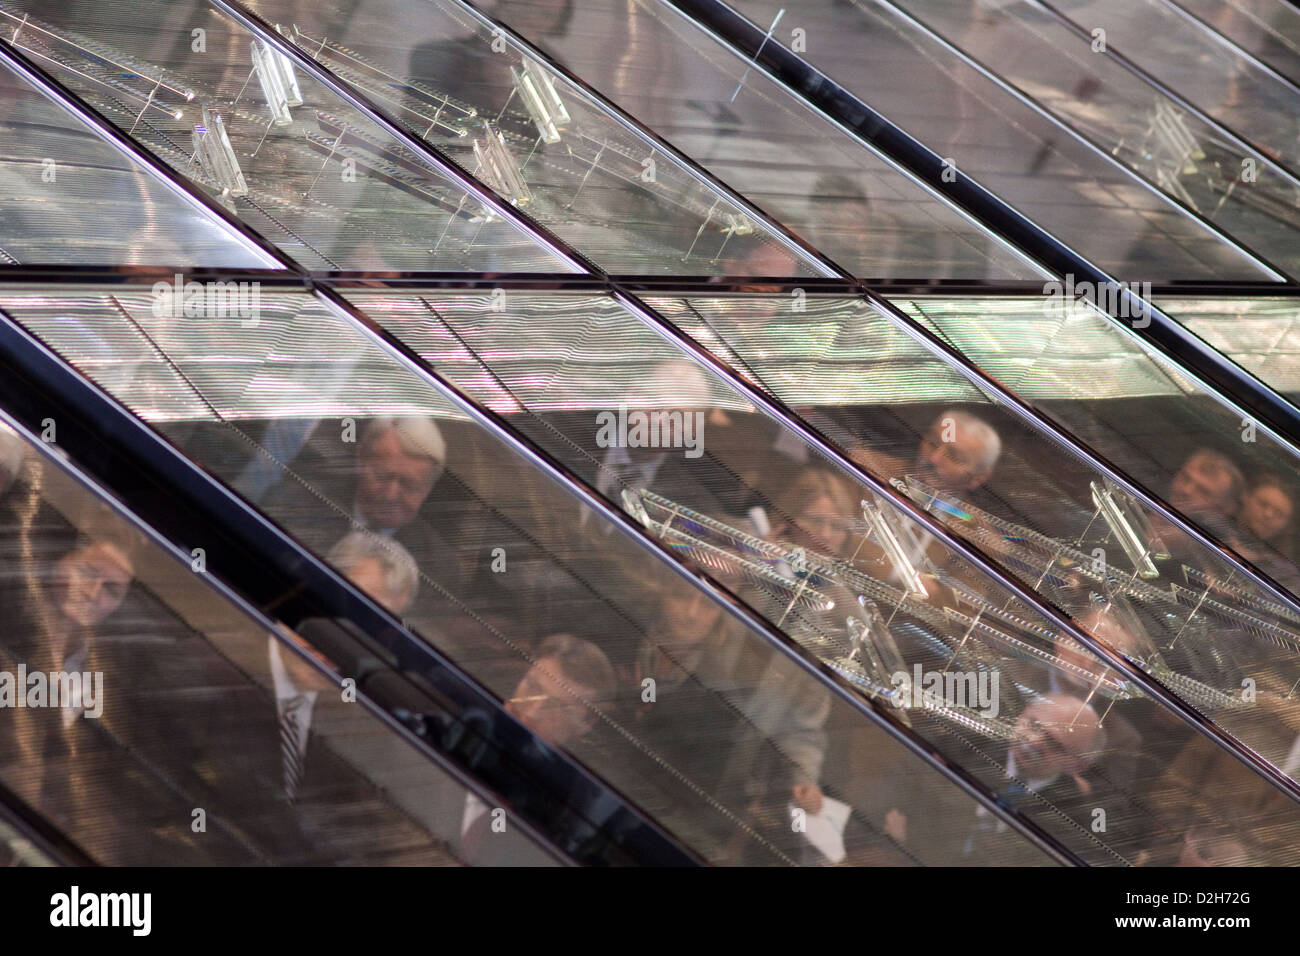 Berlin, Germany, people are reflected in a glass ceiling Stock Photo